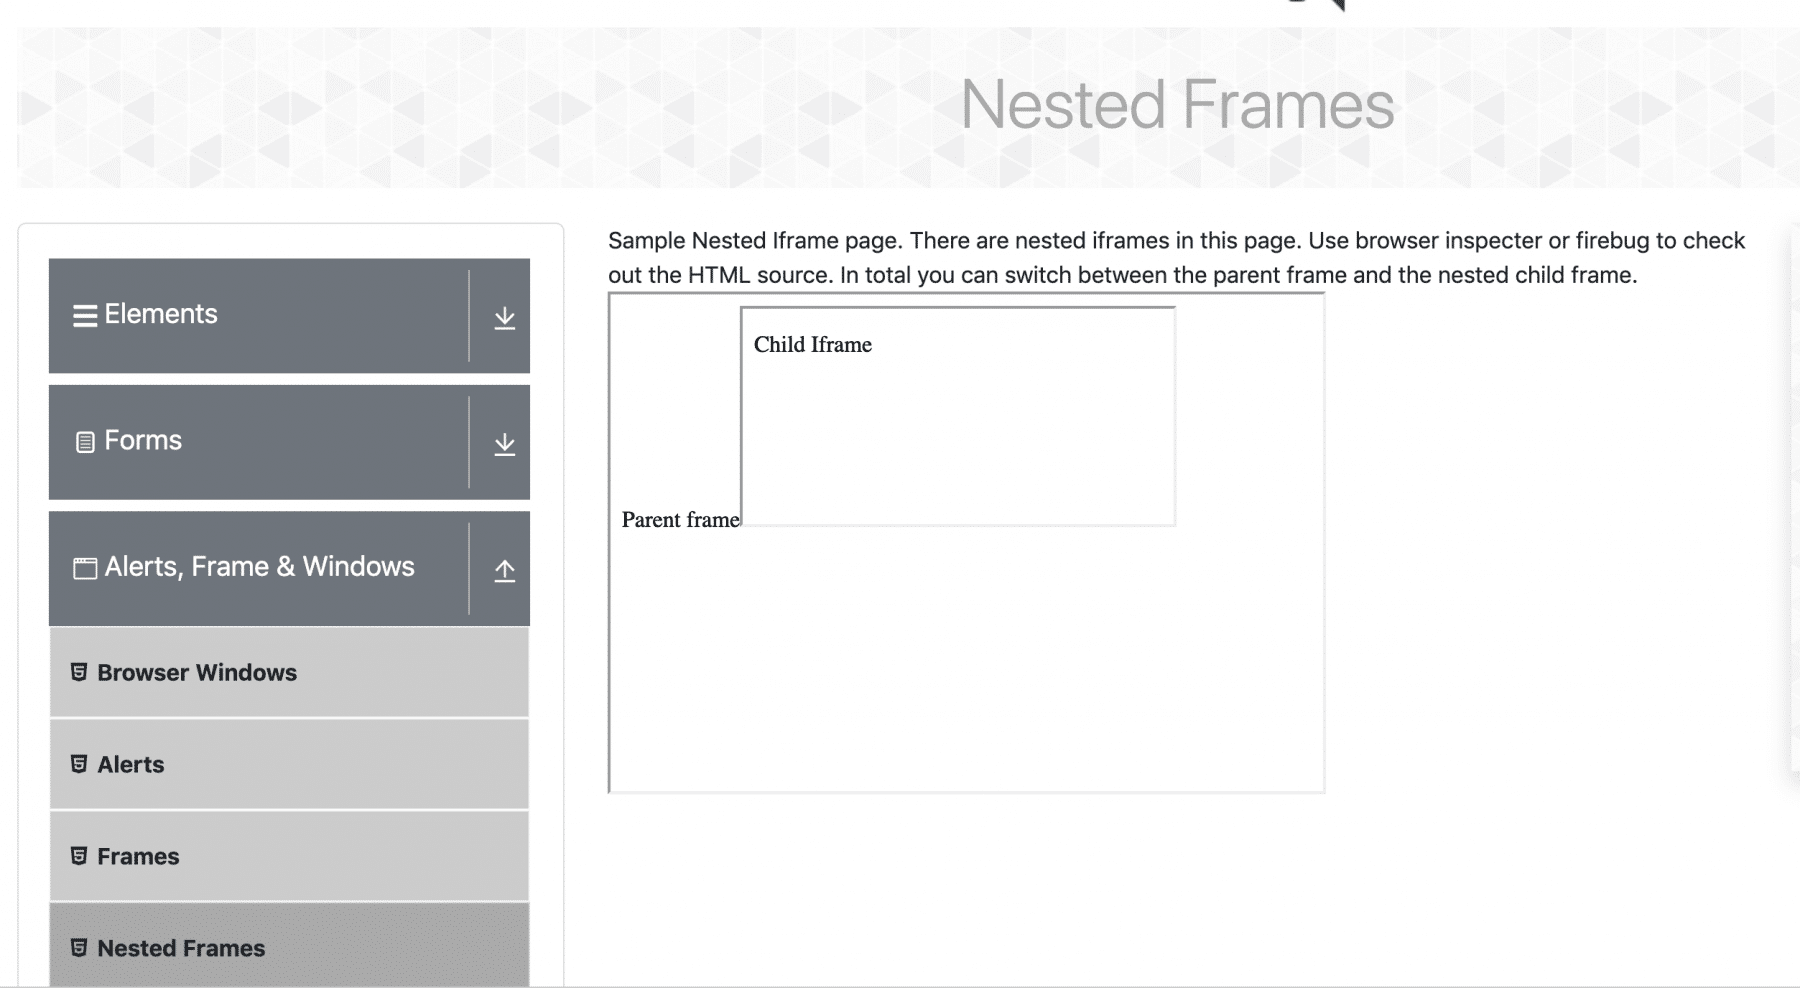 Selenium iframes Example showing Nested iFrames